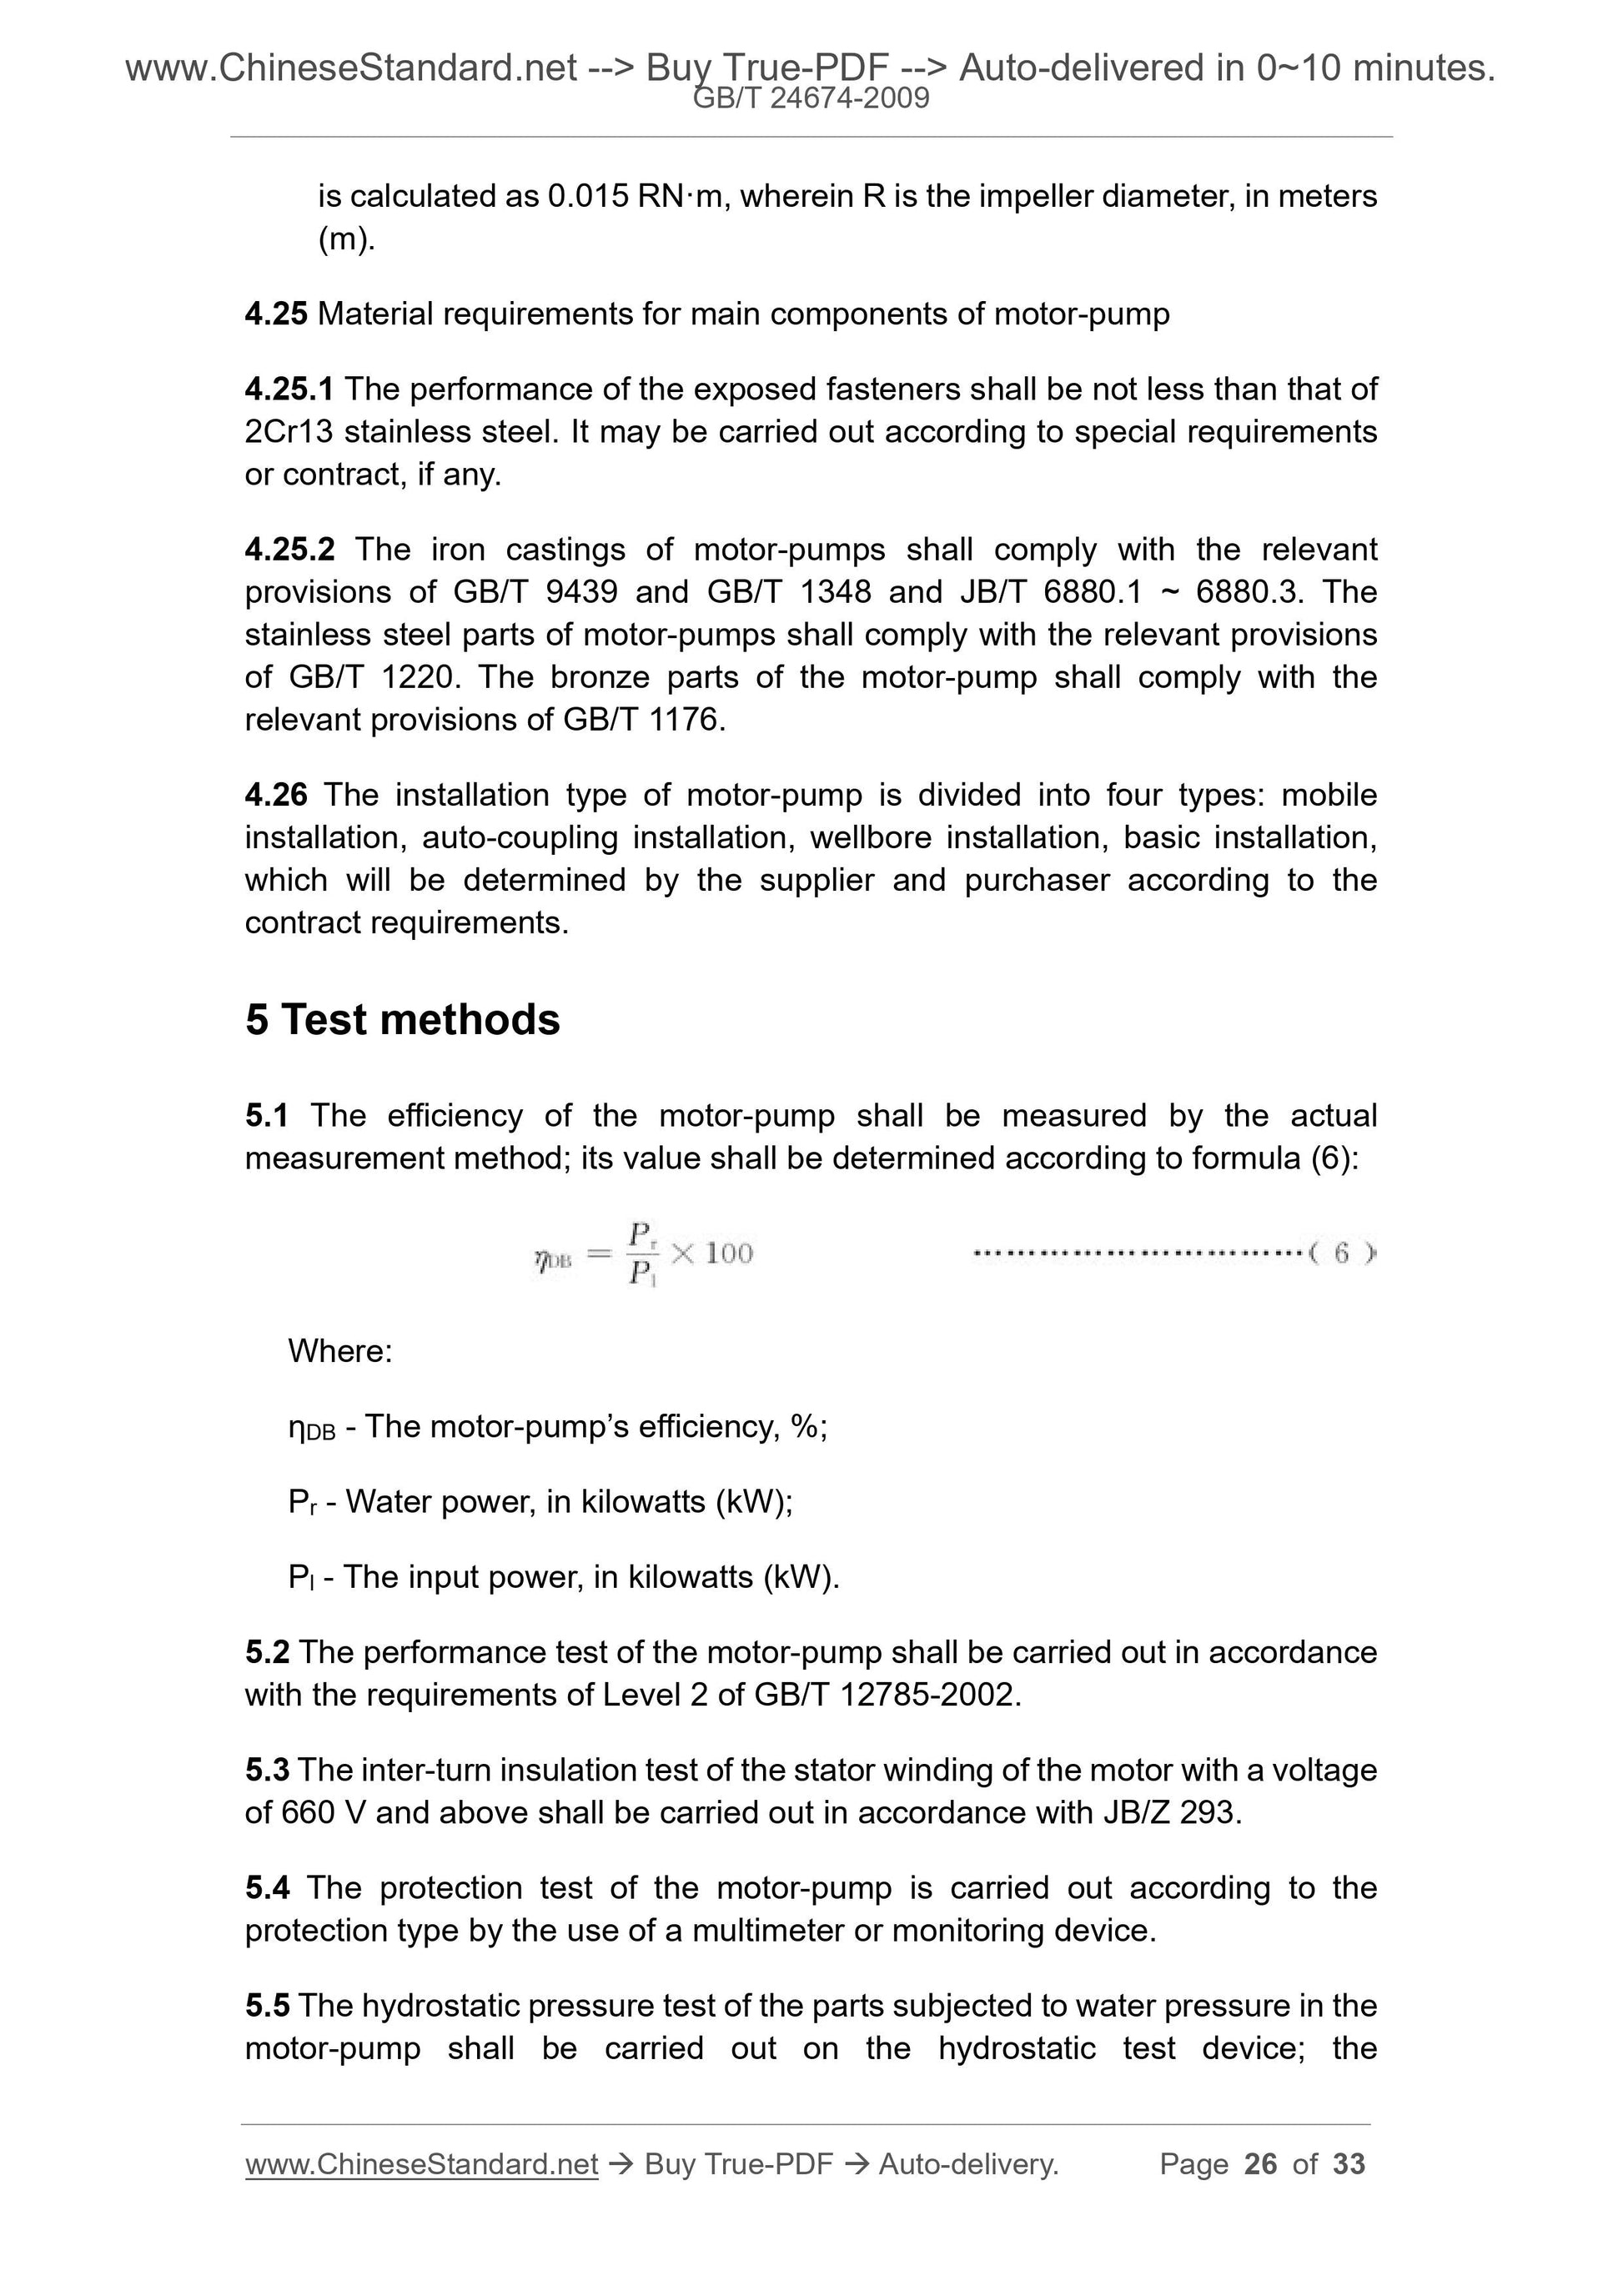 GB/T 24674-2009 Page 8